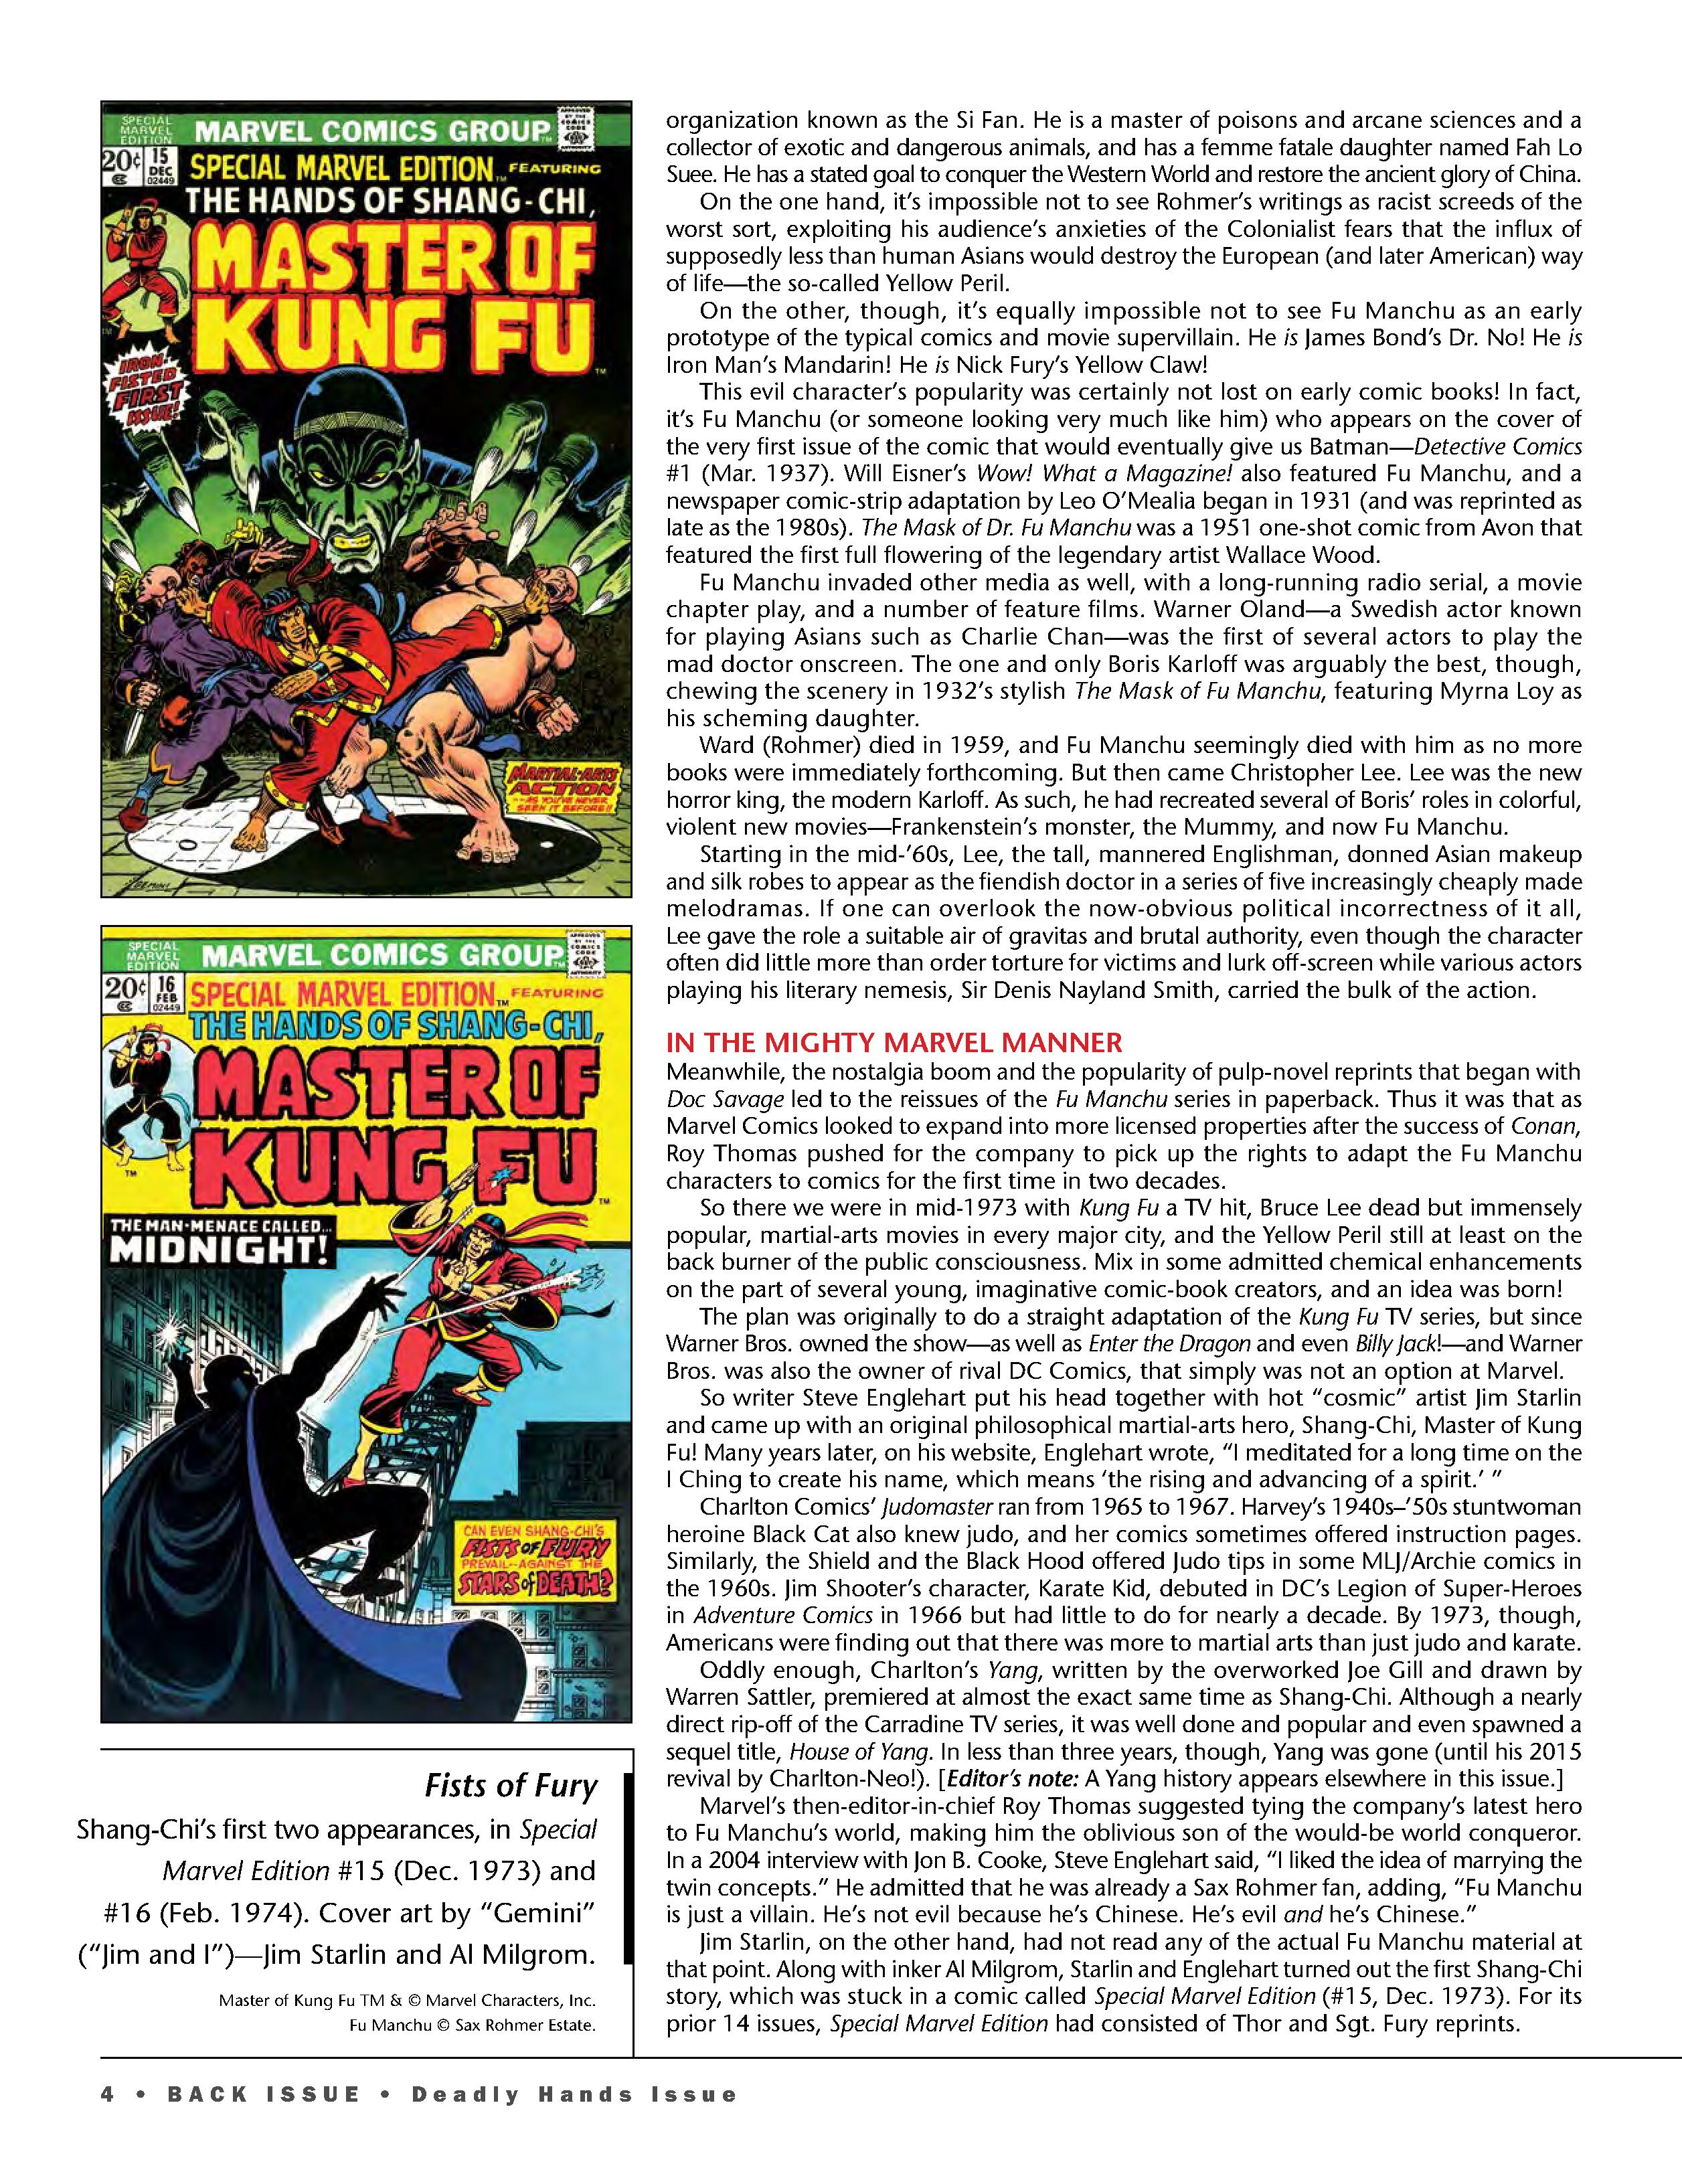 Read online Back Issue comic -  Issue #105 - 6